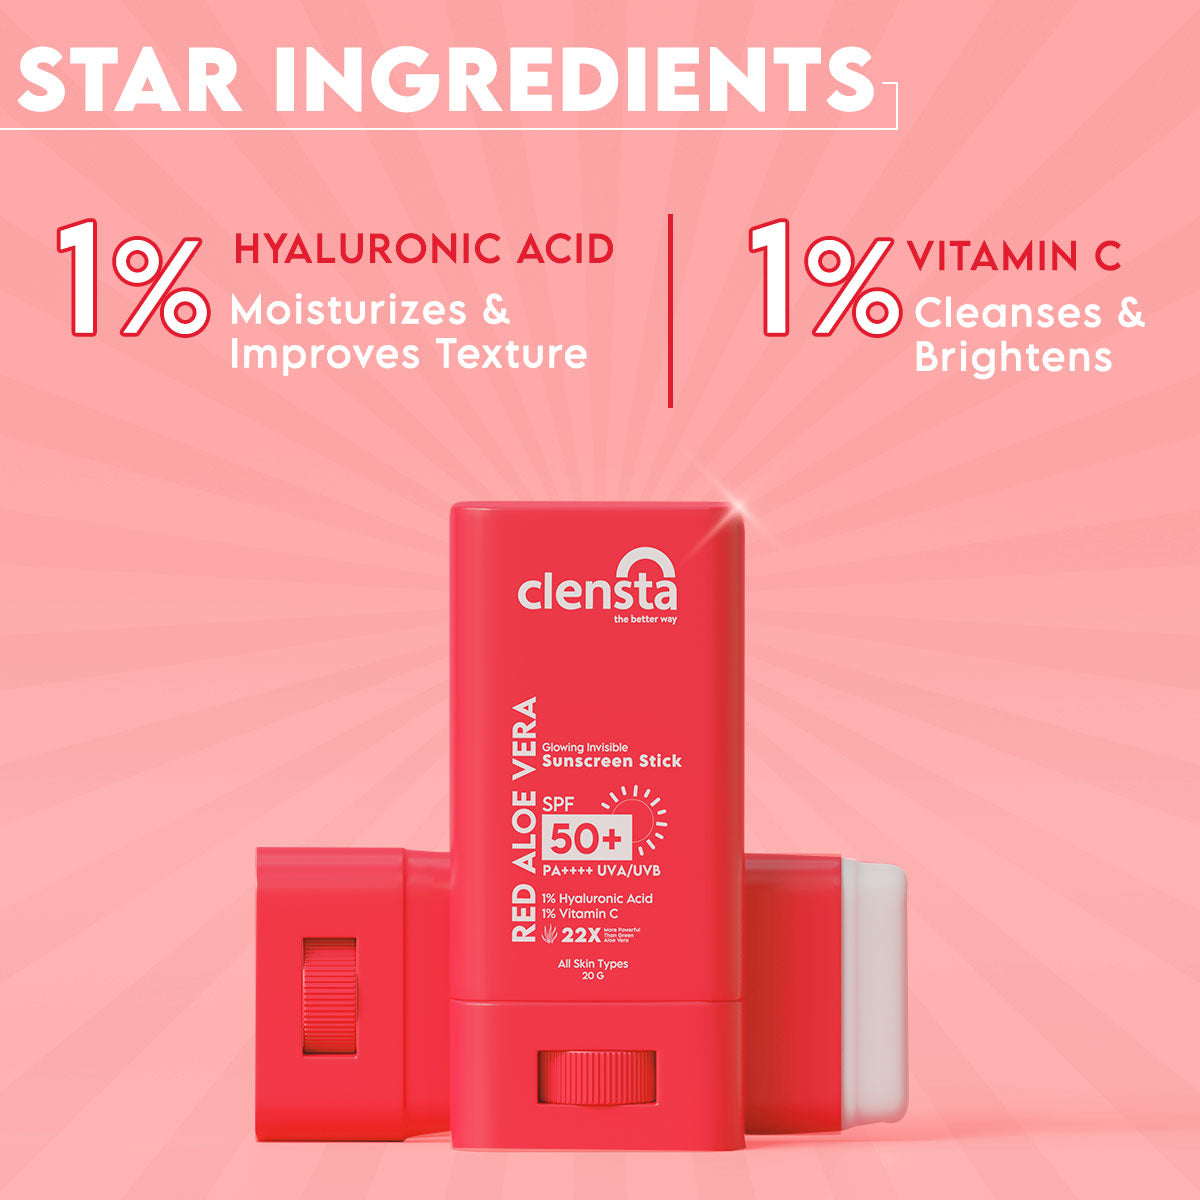 Red Aloe Vera Sun Stick with 1% Hyaluronic Acid & 1% Vitamin C for Sun Protection, Enhanced Moisture & Radiant Glow